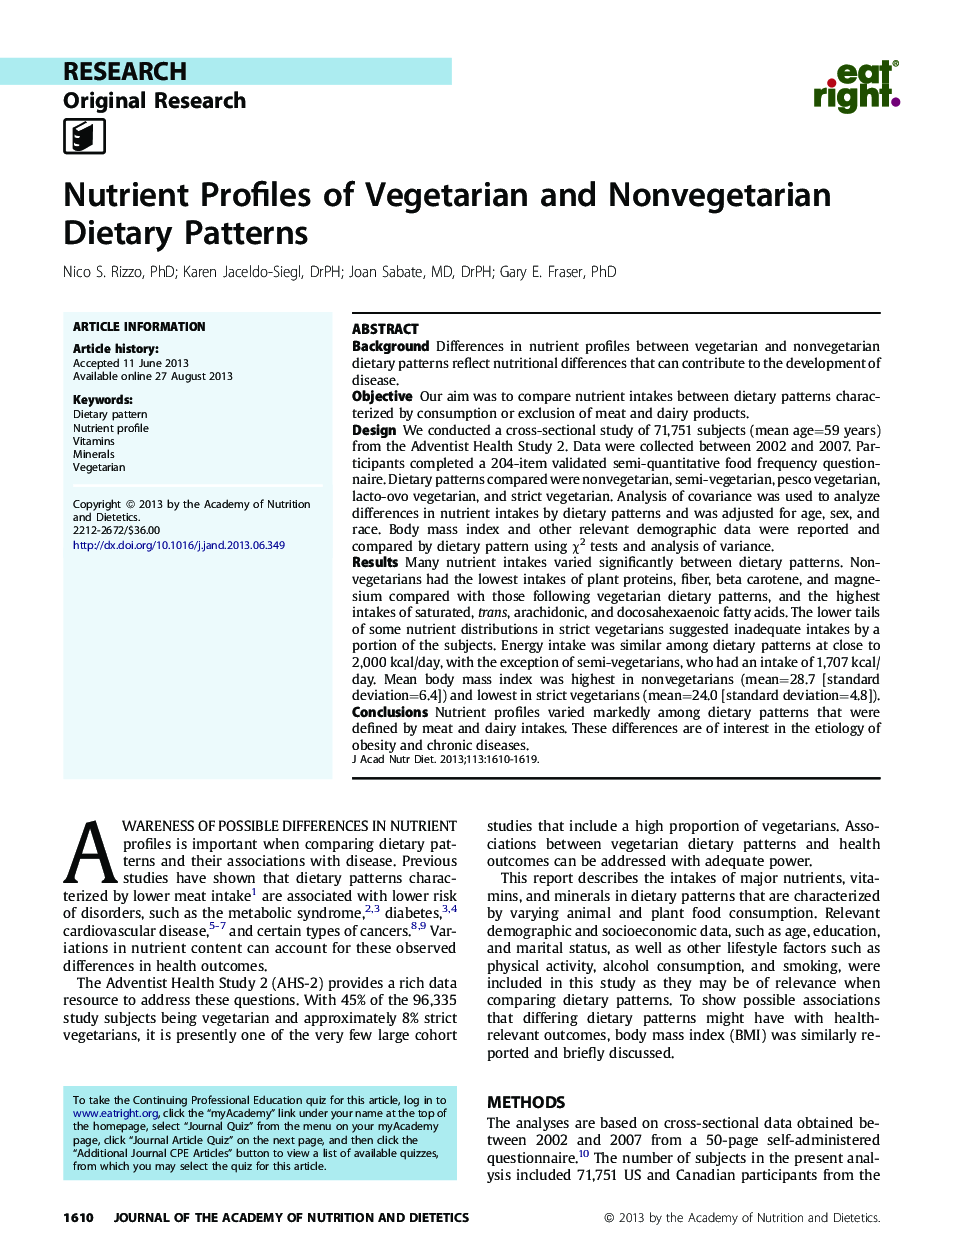 Nutrient Profiles of Vegetarian and Nonvegetarian Dietary Patterns 